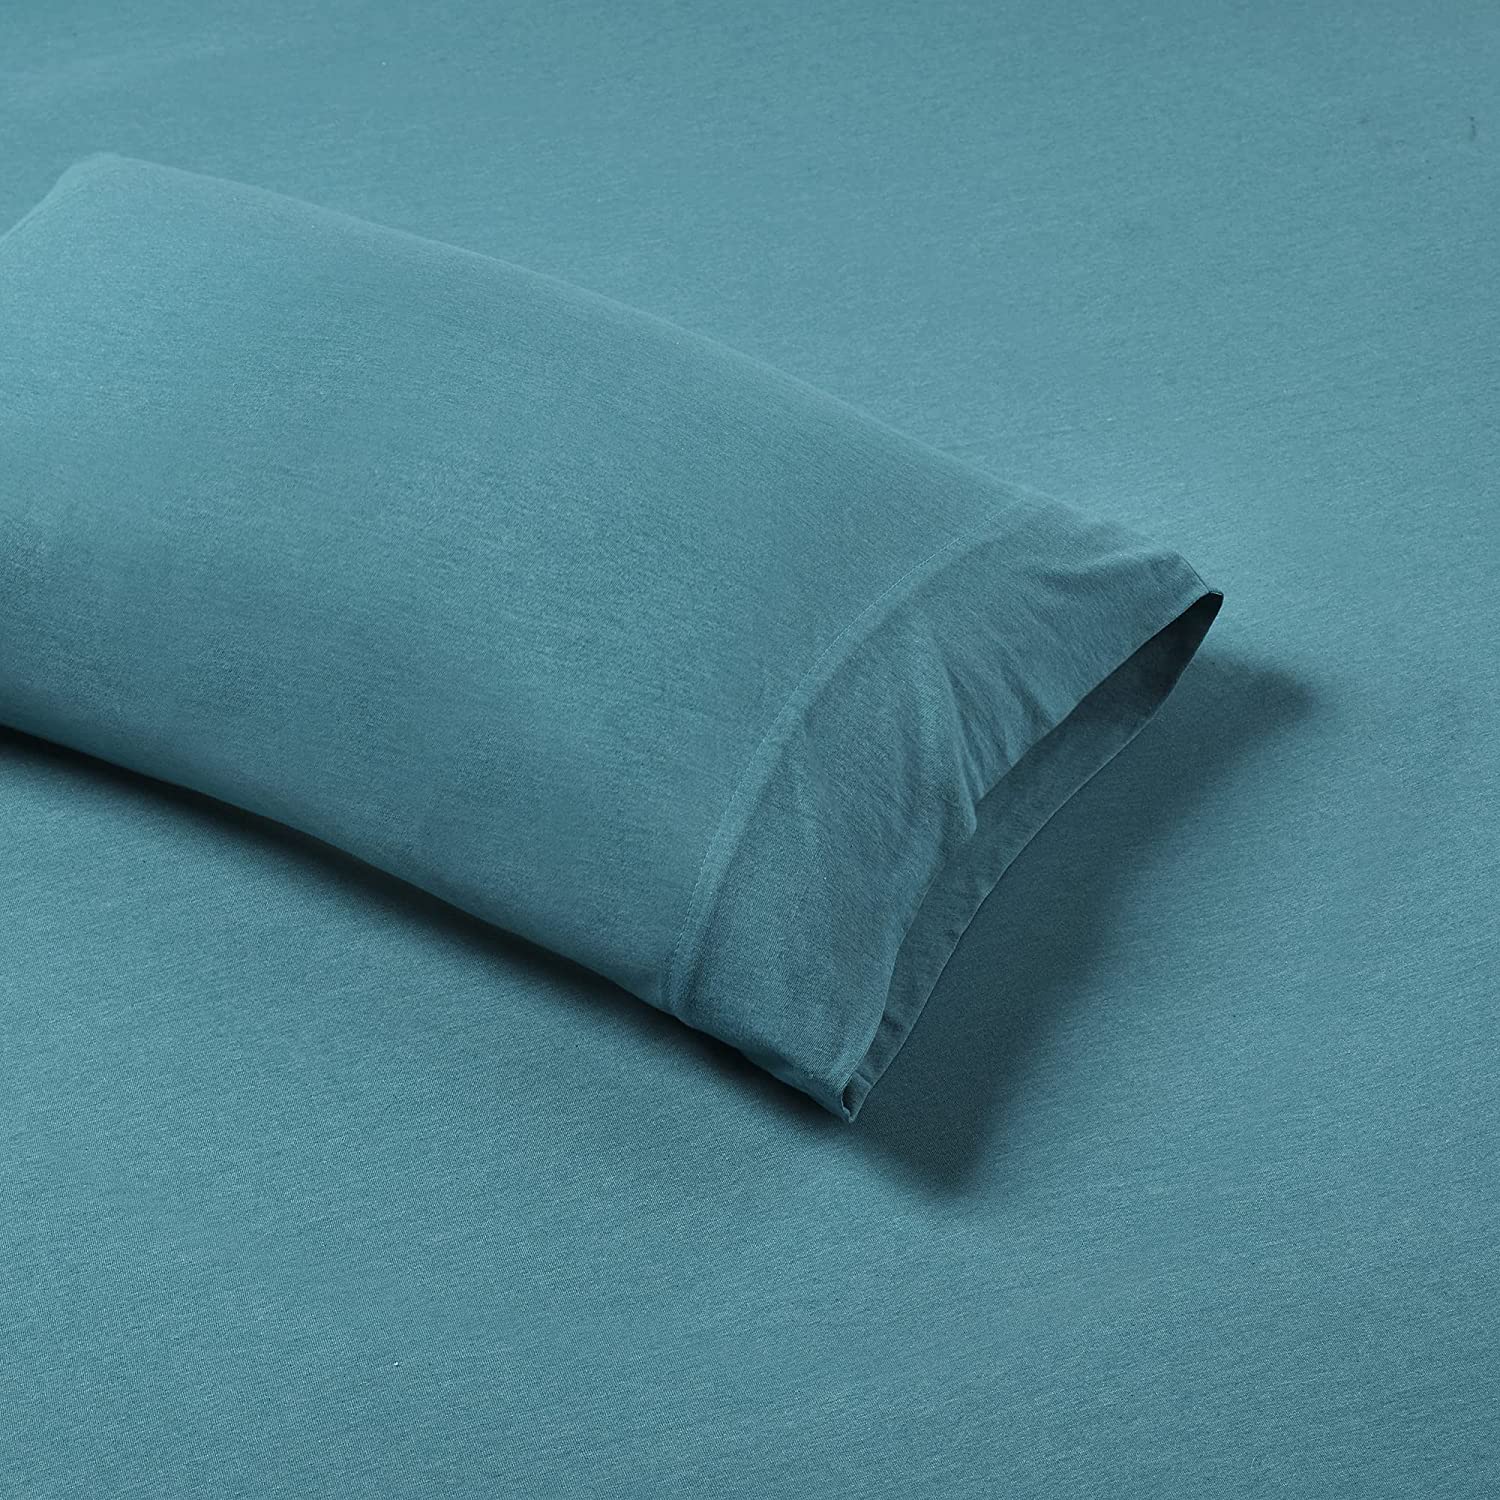 Intelligent Design ID20-1252Cotton Blend Jersey Knit Wrinkle Resistant, Soft Sheets with 14" Deep Pocket All Season, Cozy Bedding-Set, Matching Pillow Case, King, 4 Piece , Teal